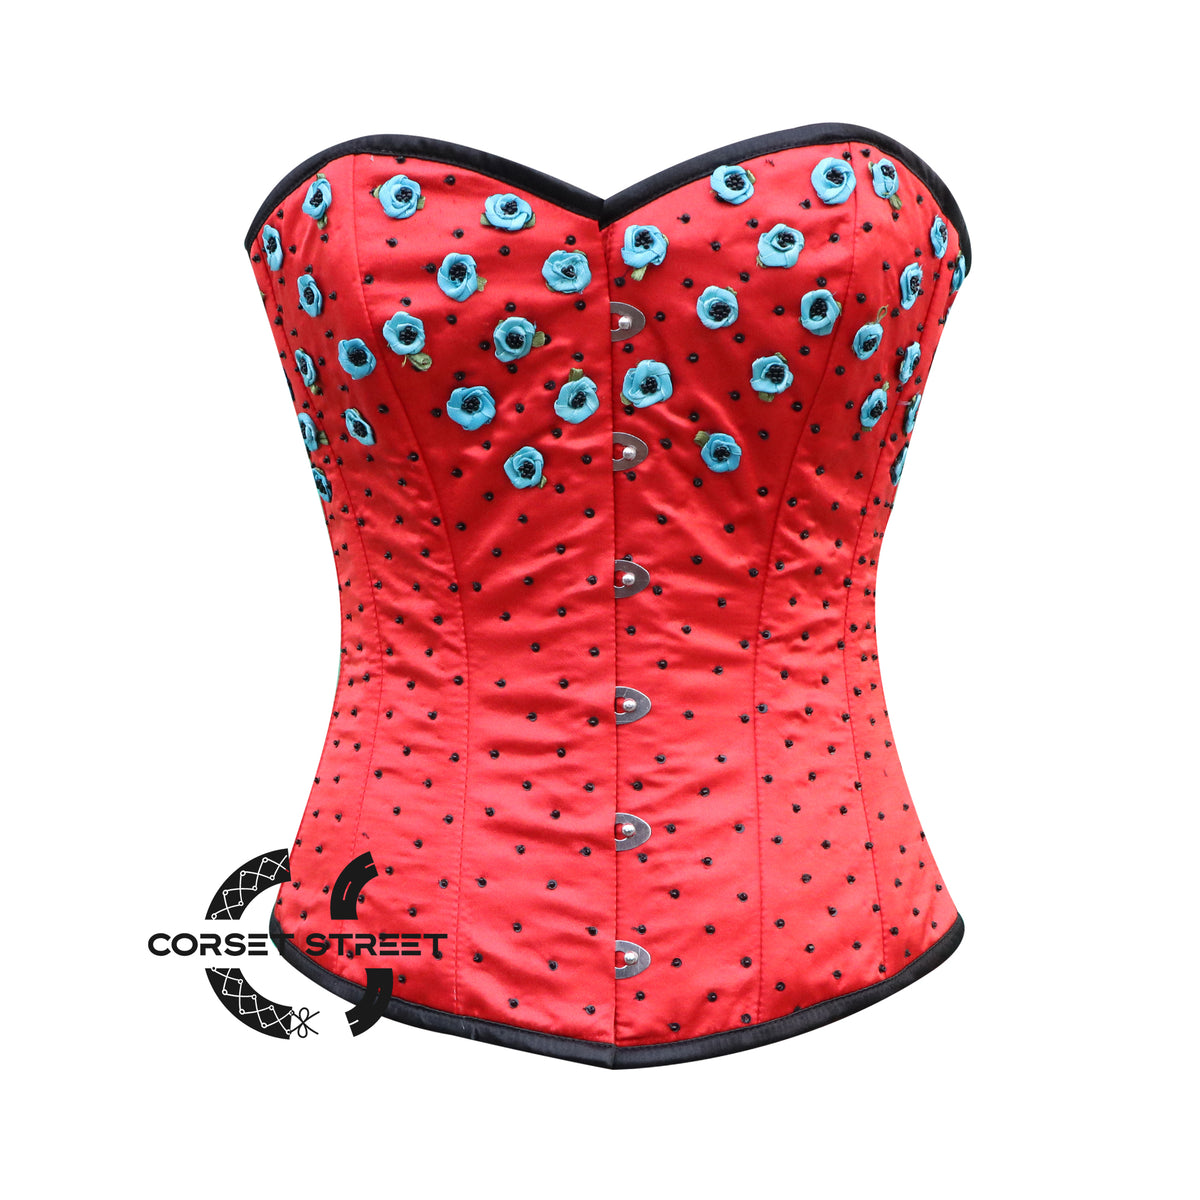 Red Satin Flowers And Sequins Hand Work Burlesque Gothic Plus Size Costume Overbust Bustier Top